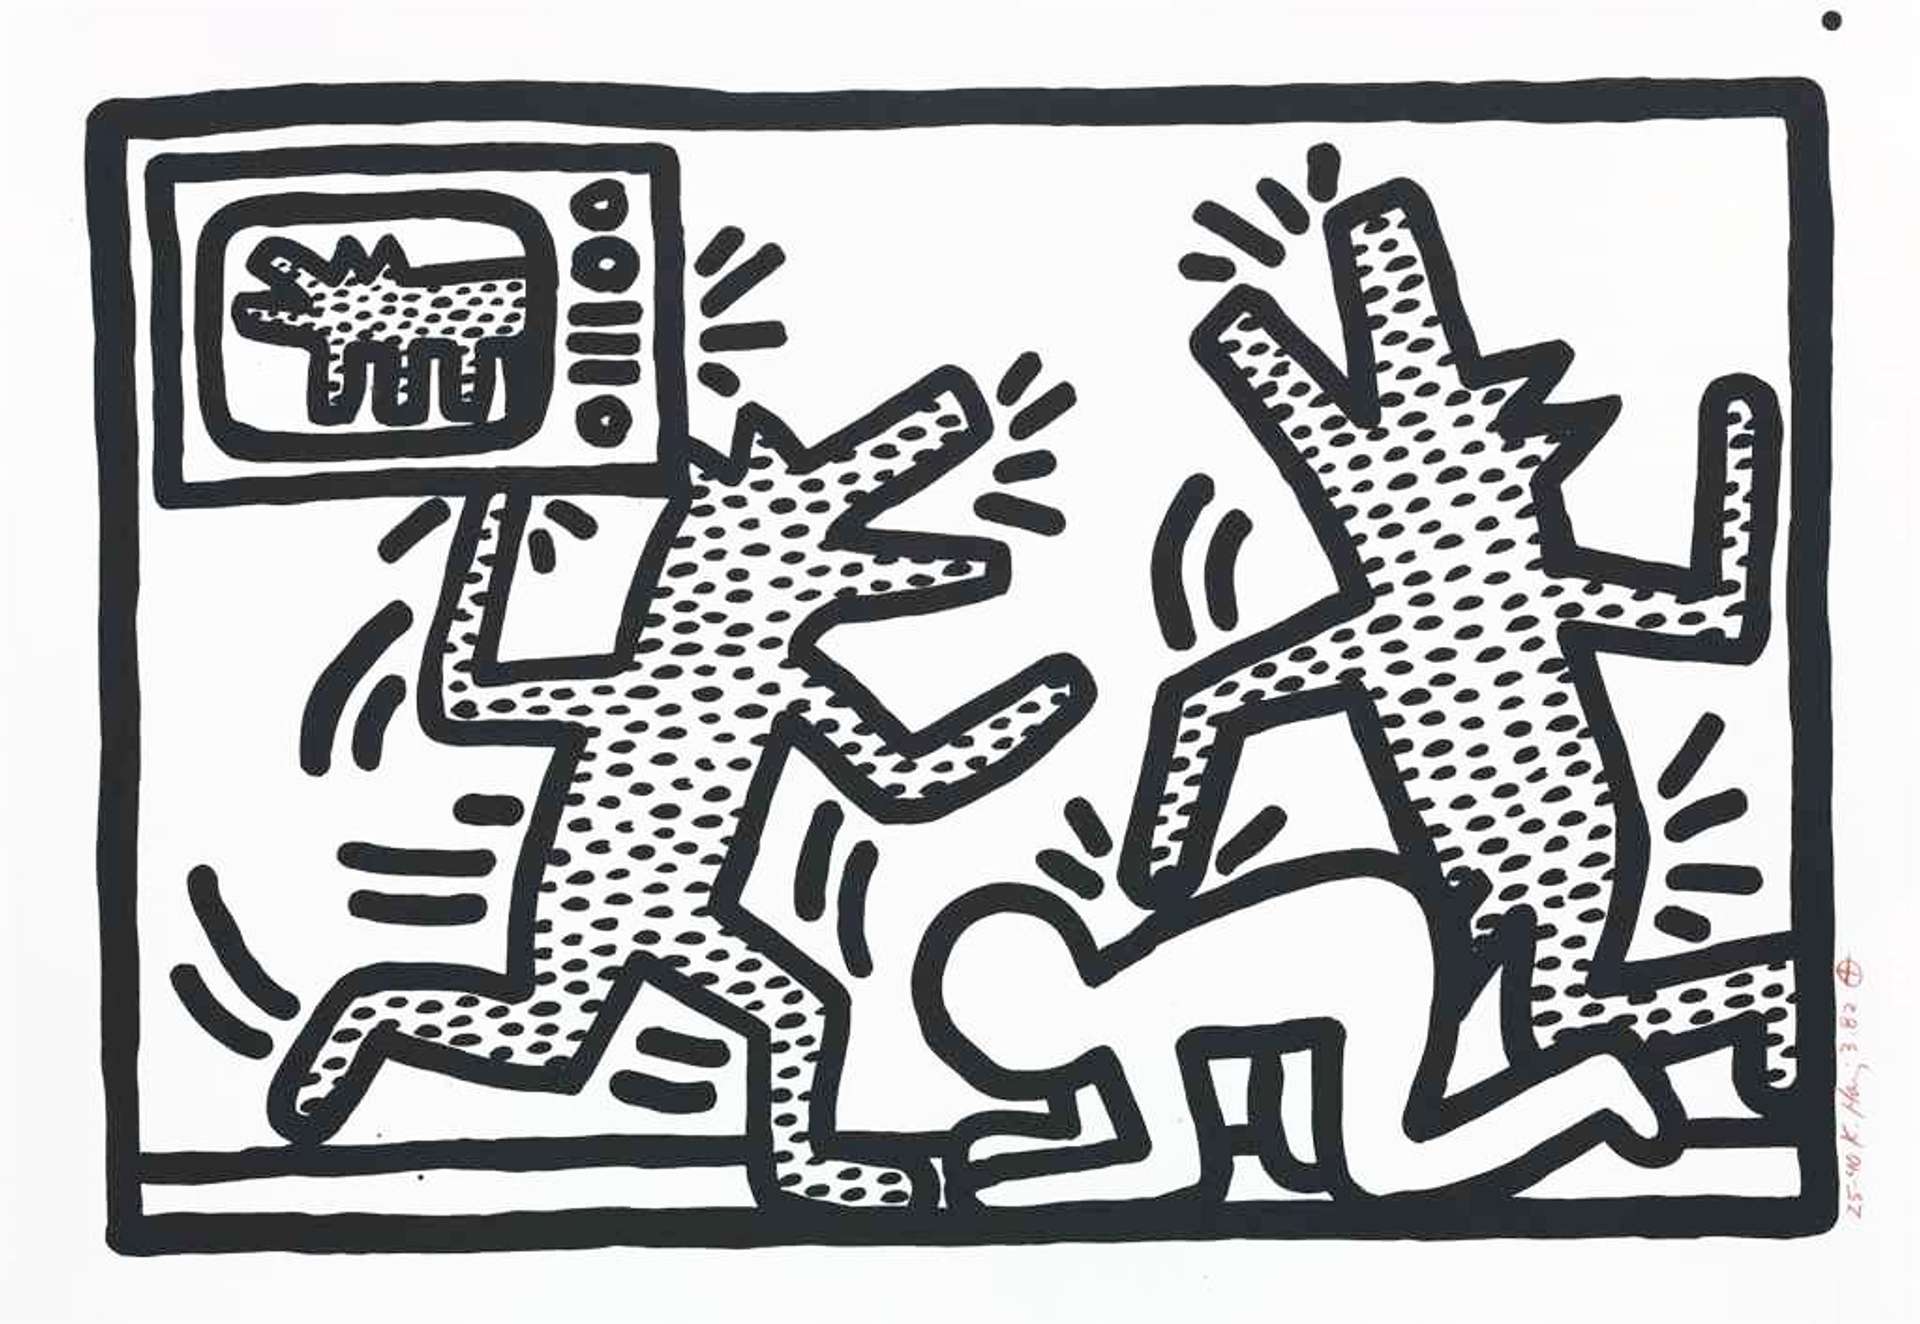 Plate II, Untitled 1 - 6 - Signed Print by Keith Haring 1982 - MyArtBroker